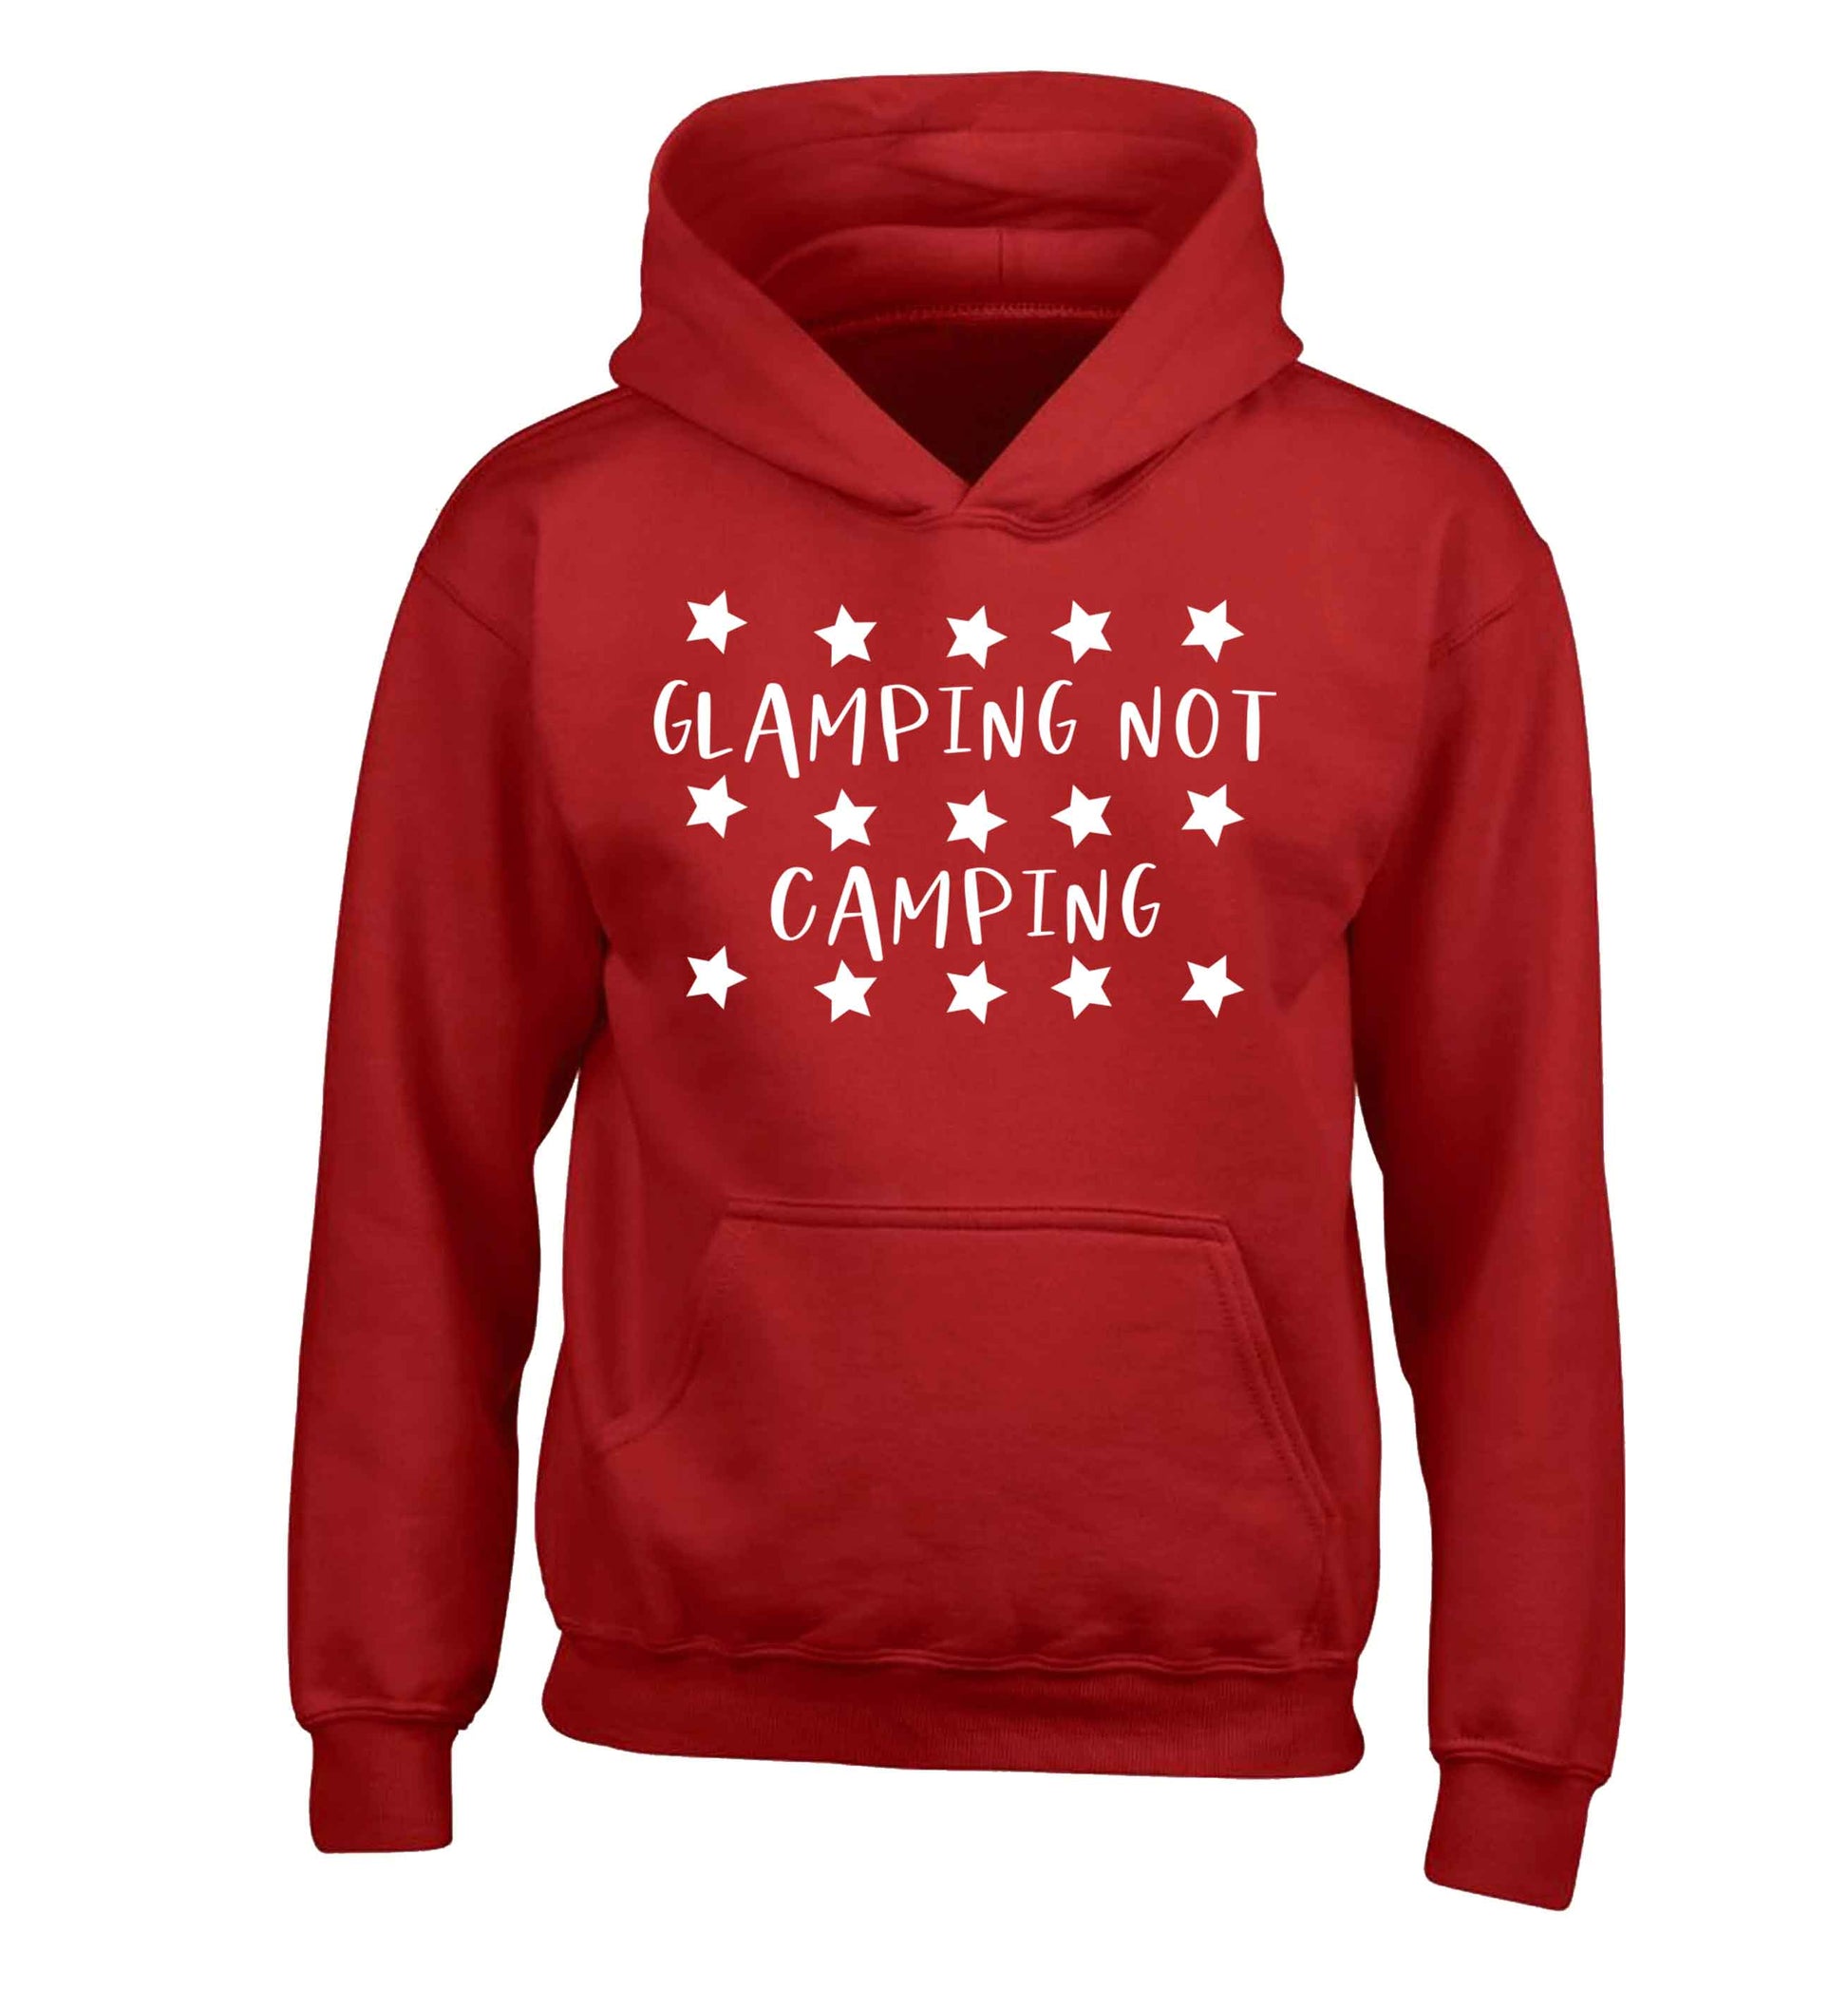 Glamping not camping children's red hoodie 12-13 Years